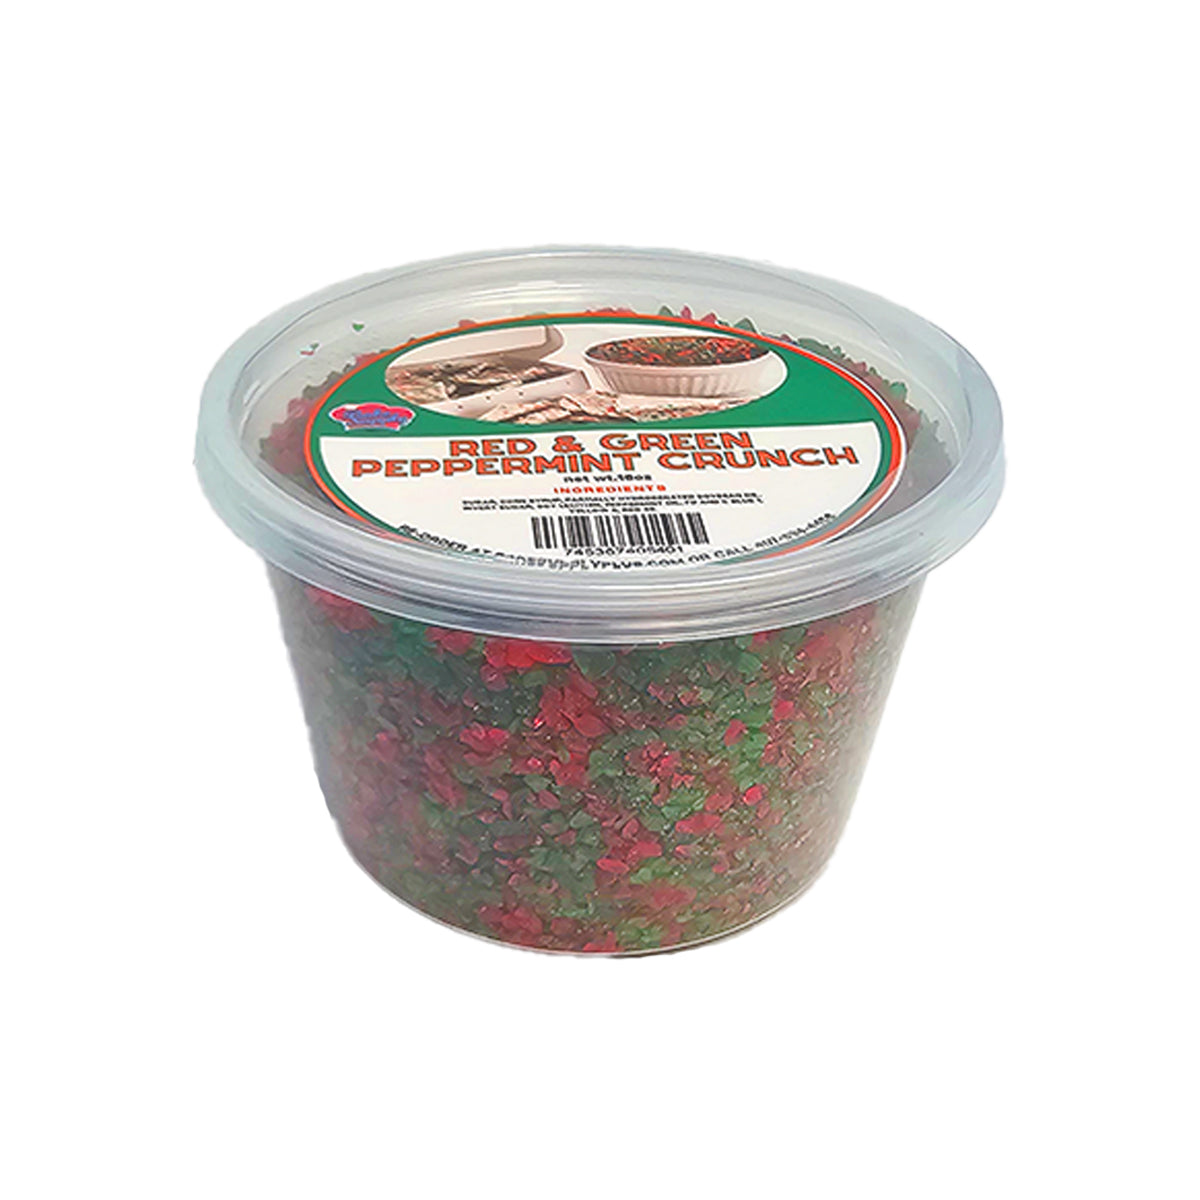 Red & Green Peppermint Candy Crunch 16oz